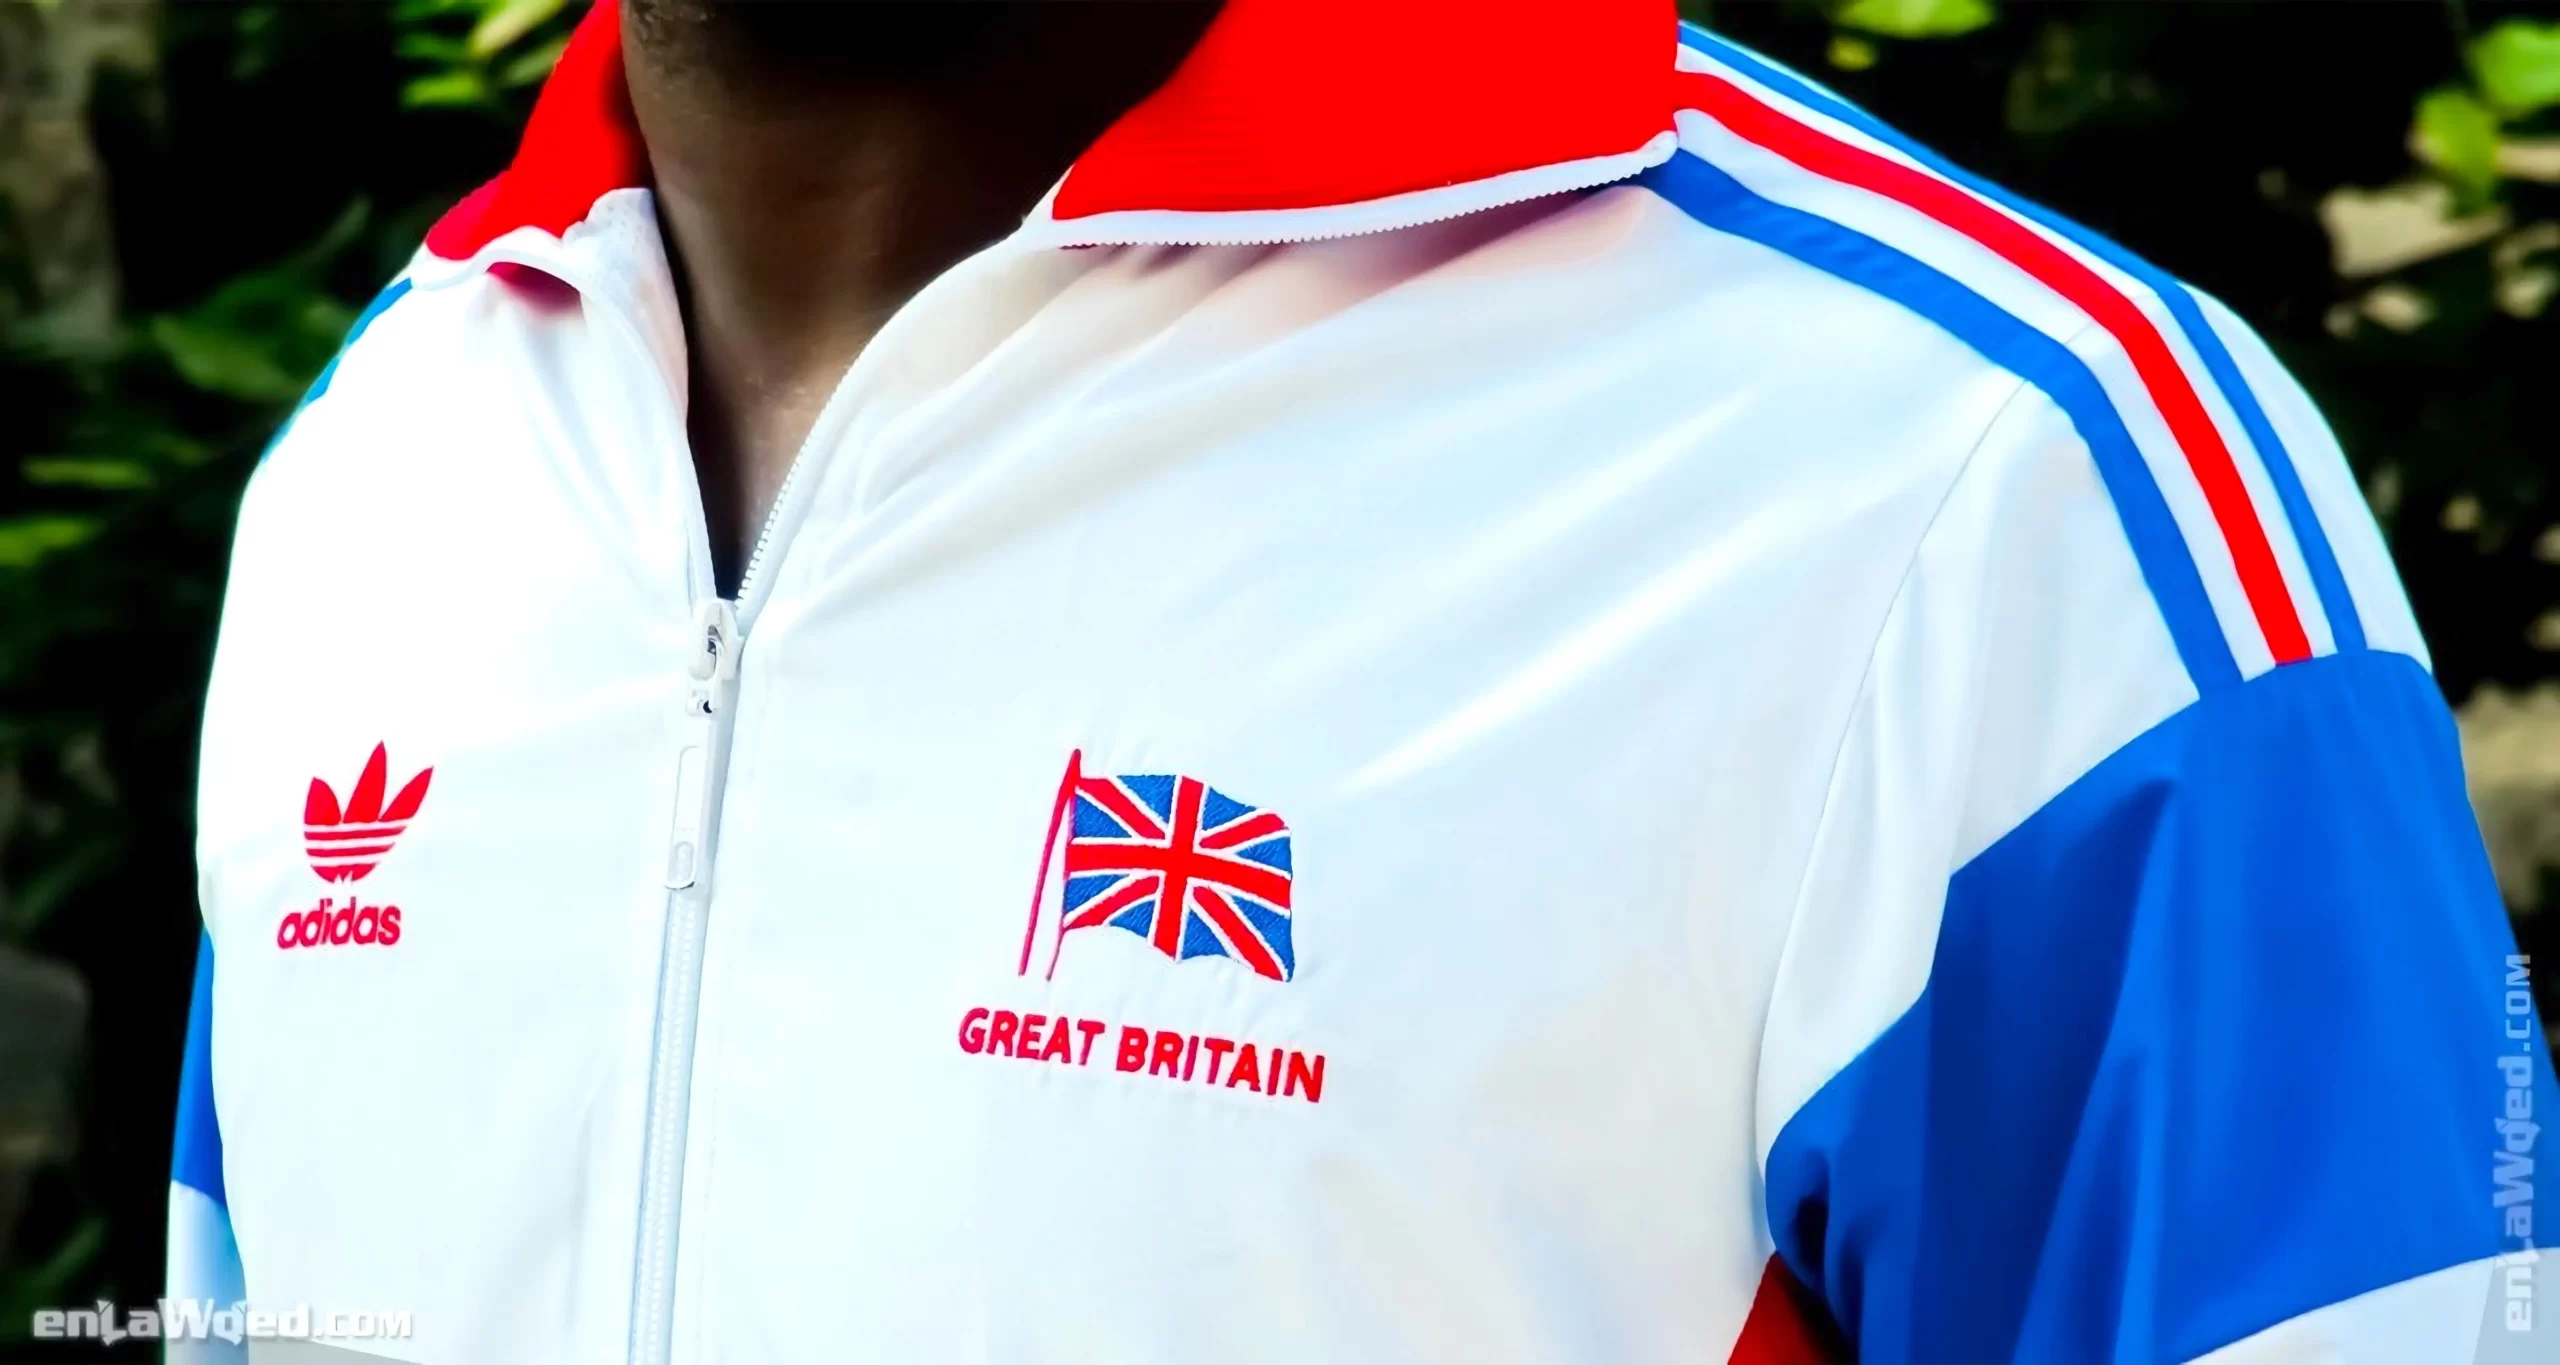 Men’s 2005 Great Britain Olympic ’84 TT by Adidas: Supported (EnLawded.com file #lmcen69vpzka2vnmzaf)